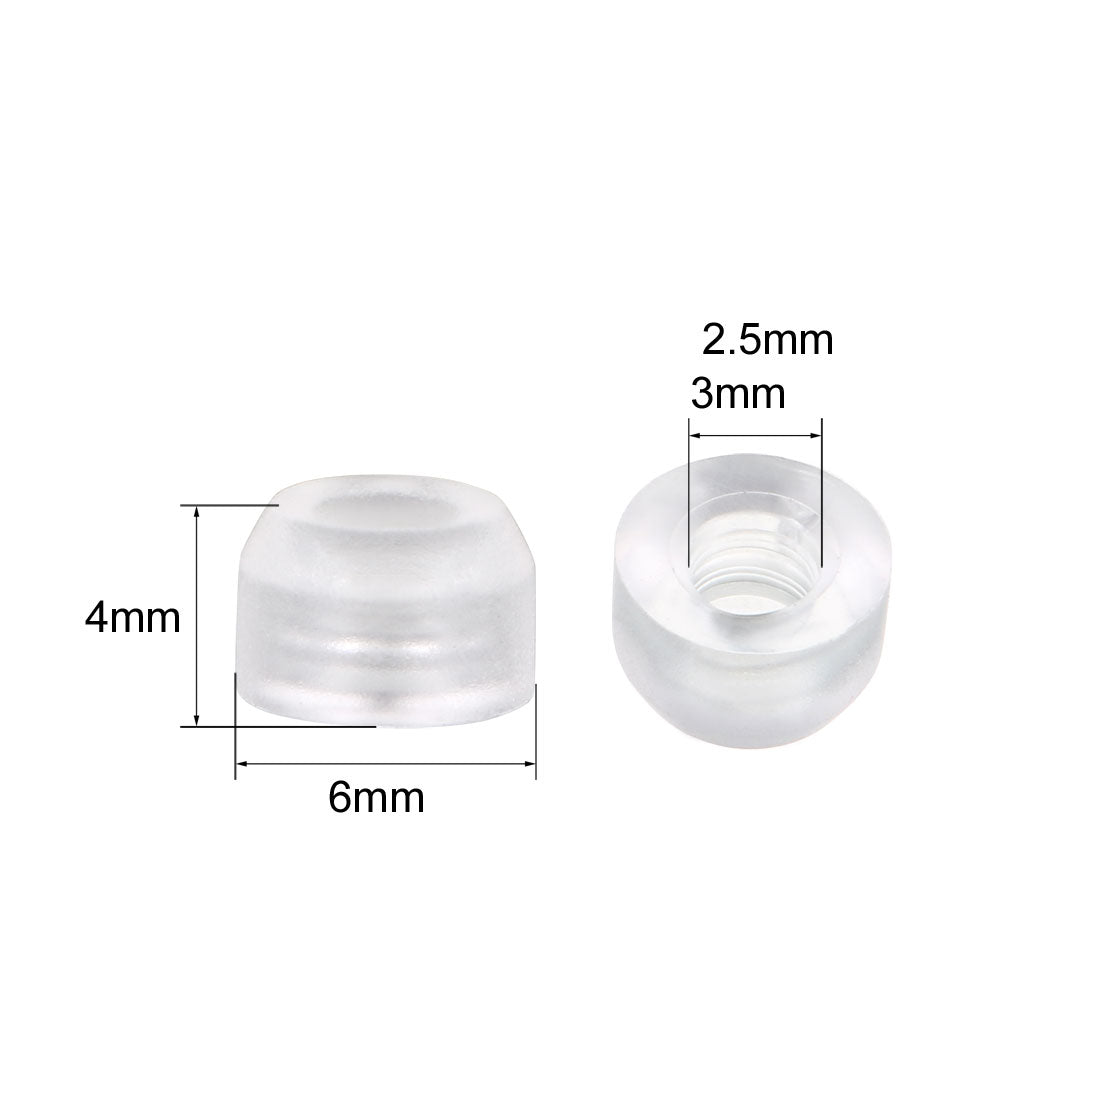 uxcell Uxcell 20pcs 3mm Hole Dia Silica-gel Pushbutton Tactile Switch Caps Cover Keycaps Protector Transparent for 6x6 Tact Switch